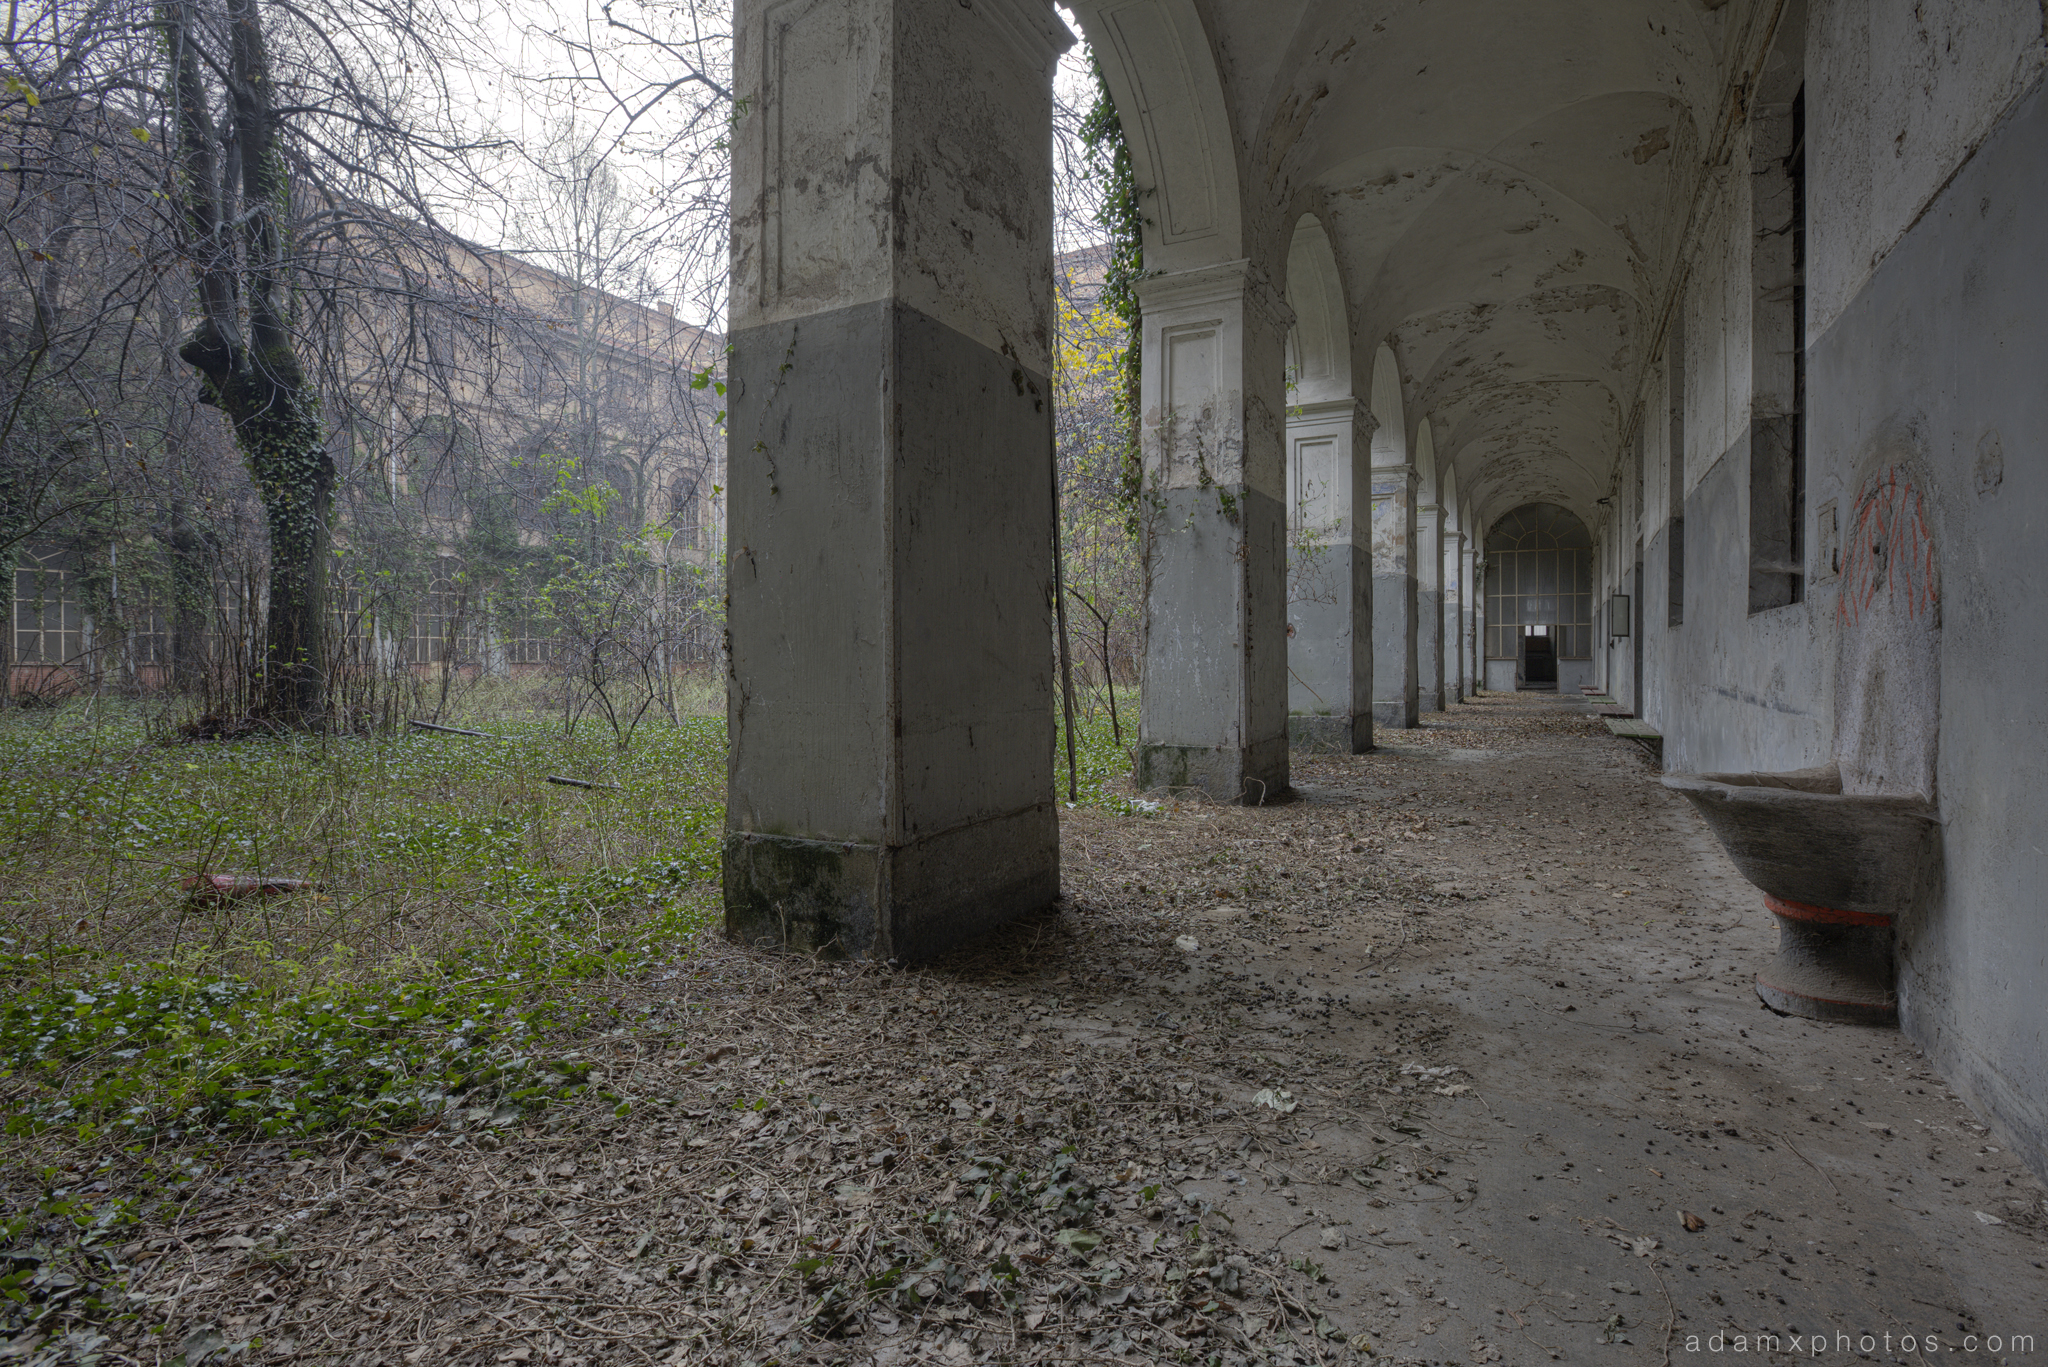 Manicomio di R Dr Rossetti Rosetti doctor Urbex Adam X Urban Exploration courtyard quad outside columns cloister cloisters overgrown trees overgrown overgrowth photo photos report decay detail UE abandoned derelict unused empty disused decay decayed decaying grimy grime